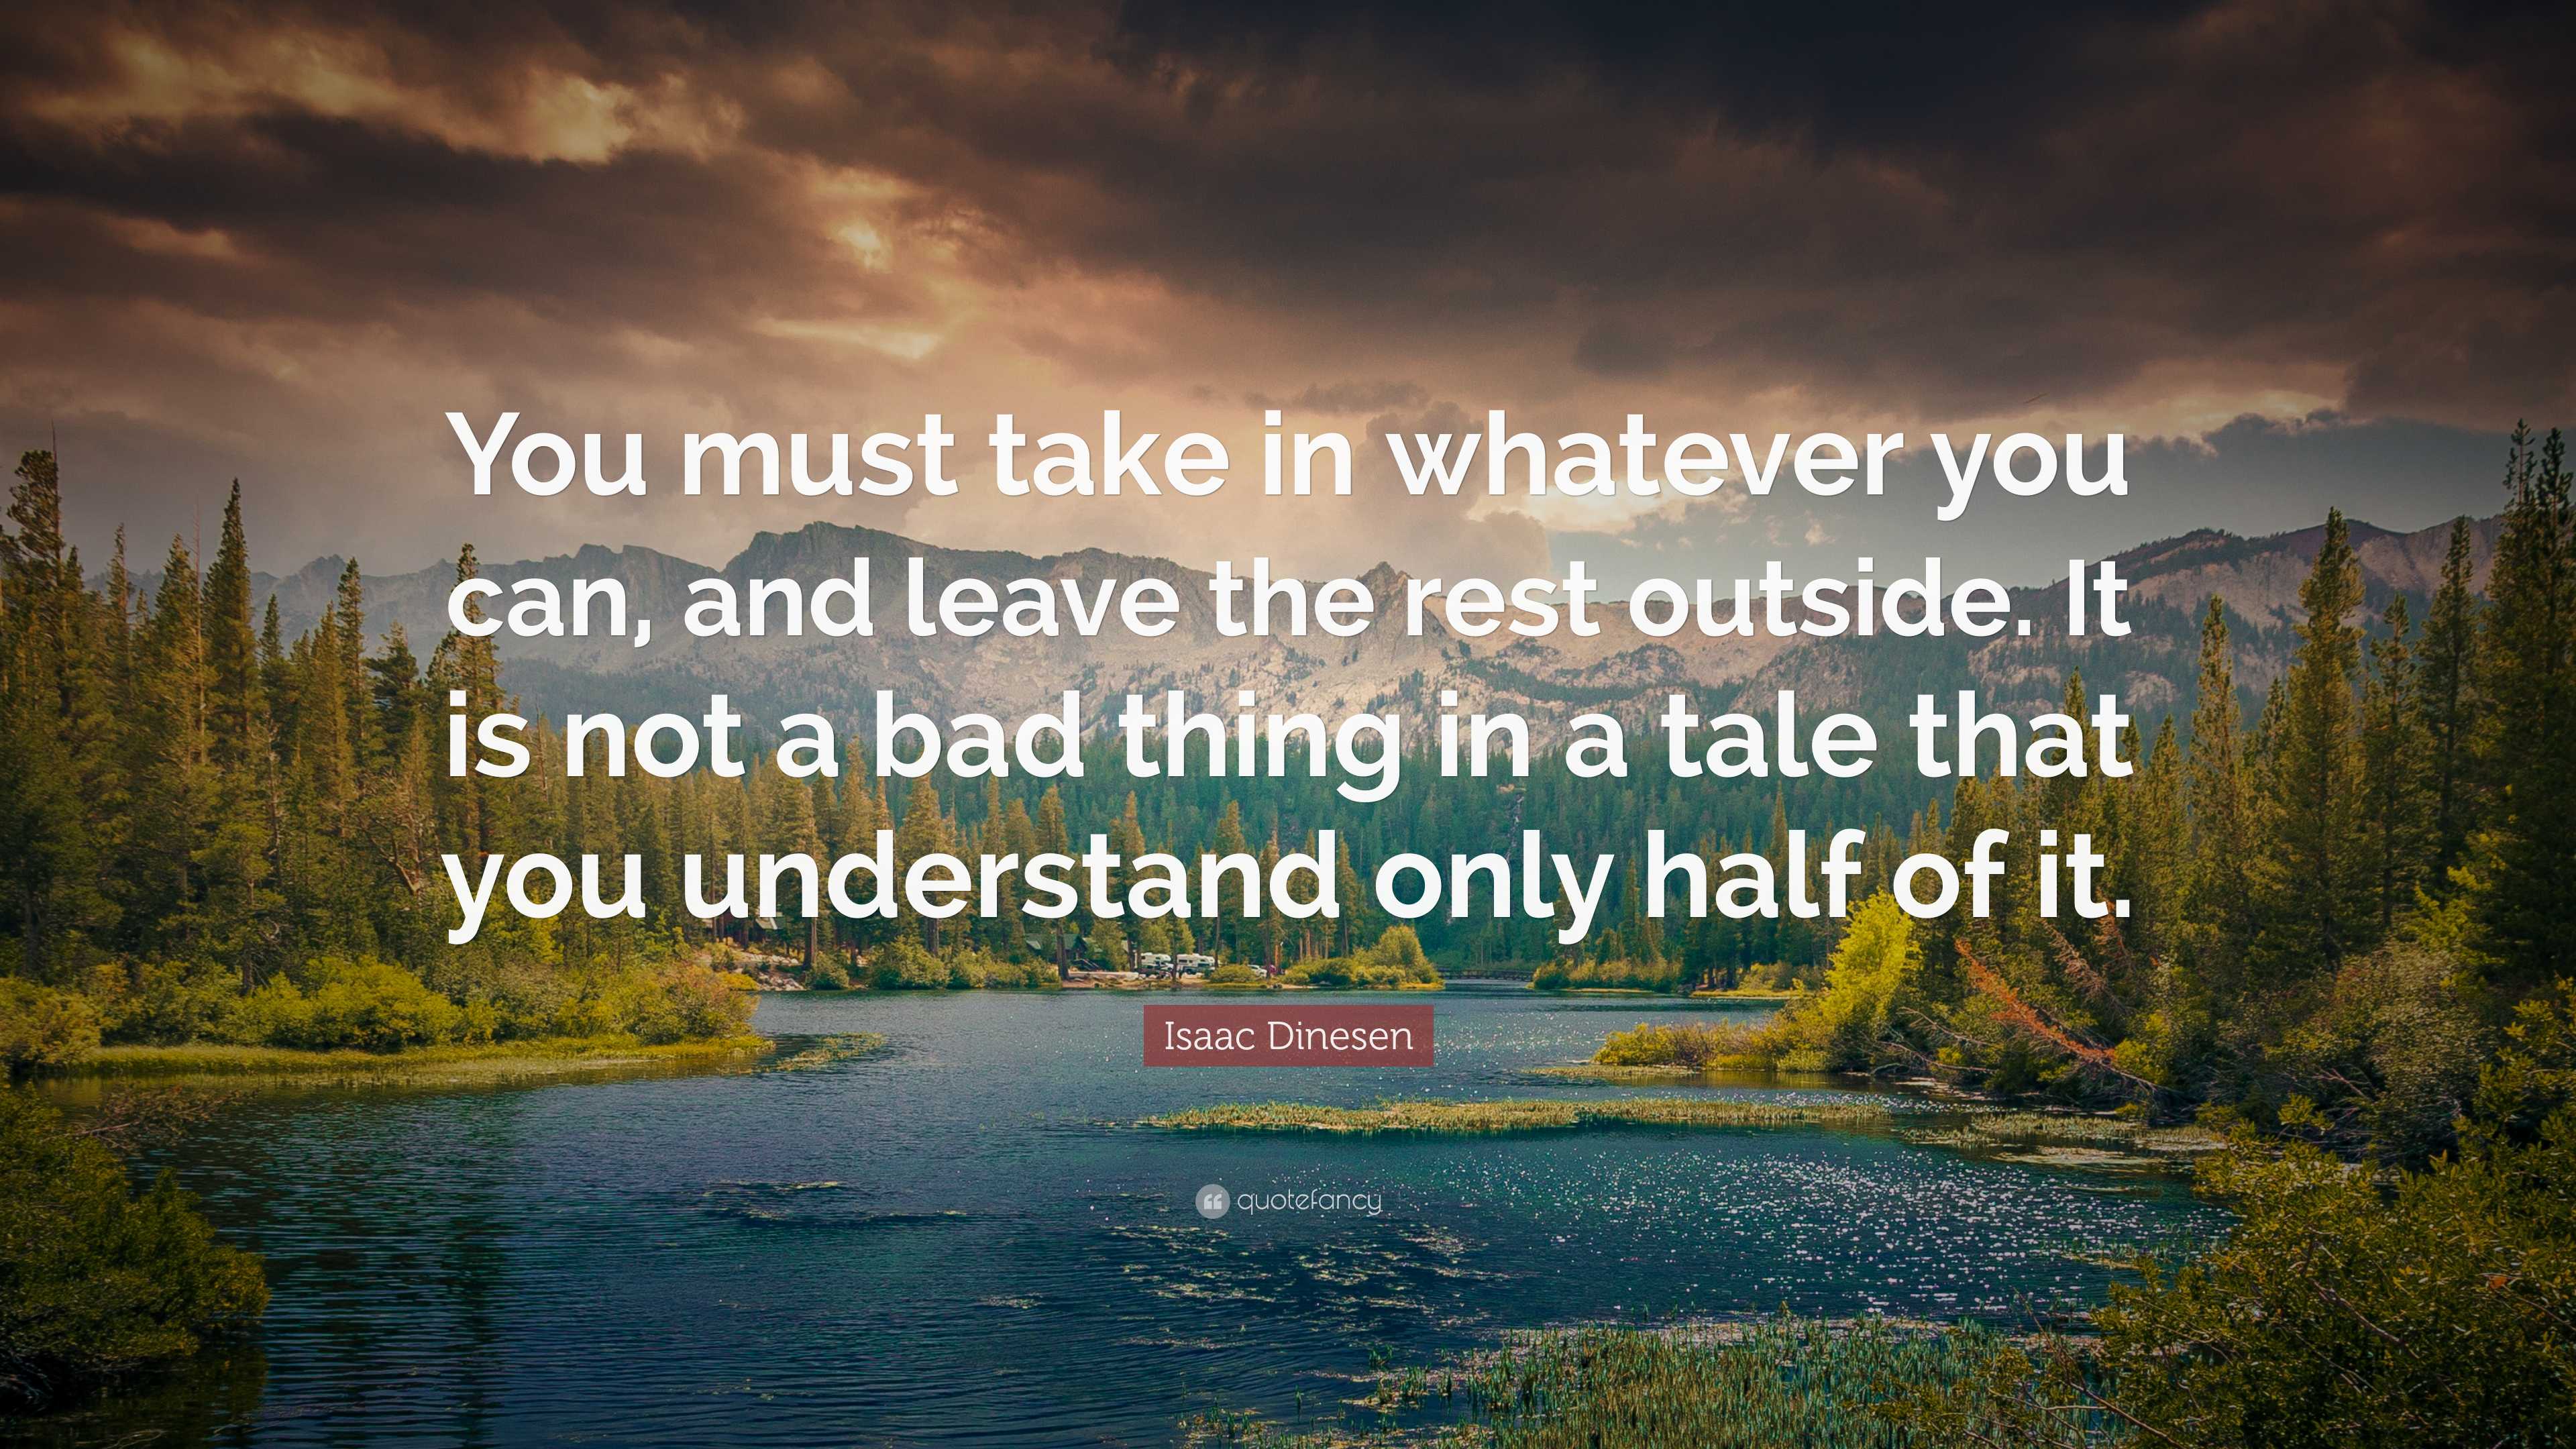 Isaac Dinesen Quote: “You must take in whatever you can, and leave the ...